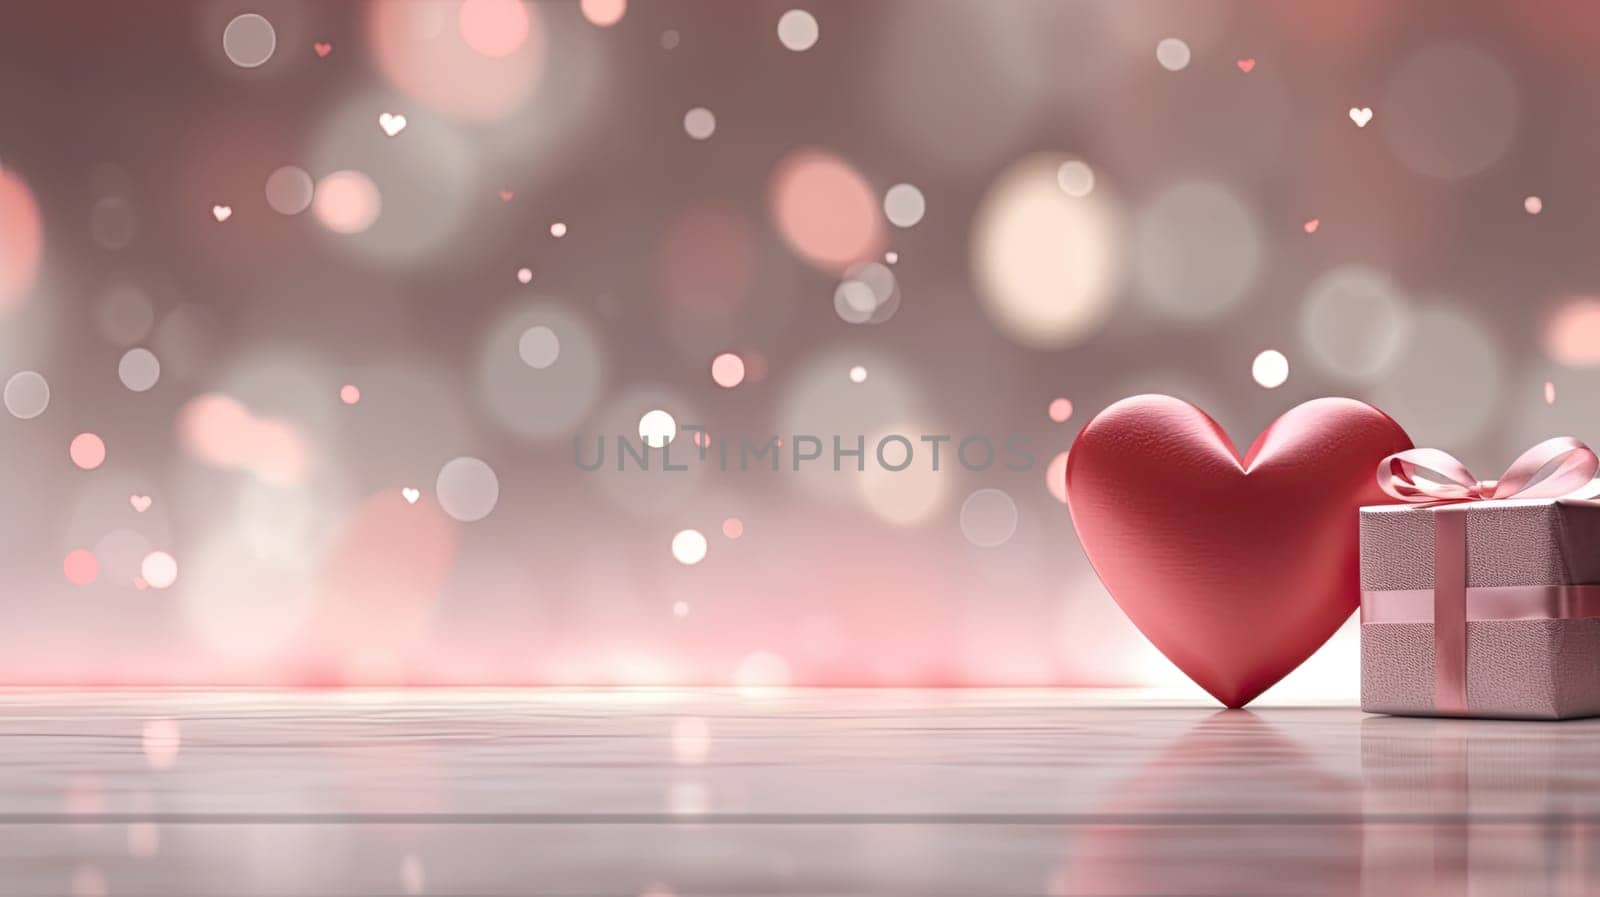 Pink heart and gift box over a wooden table with blurred background and copy space. Love and san valentine concept by papatonic